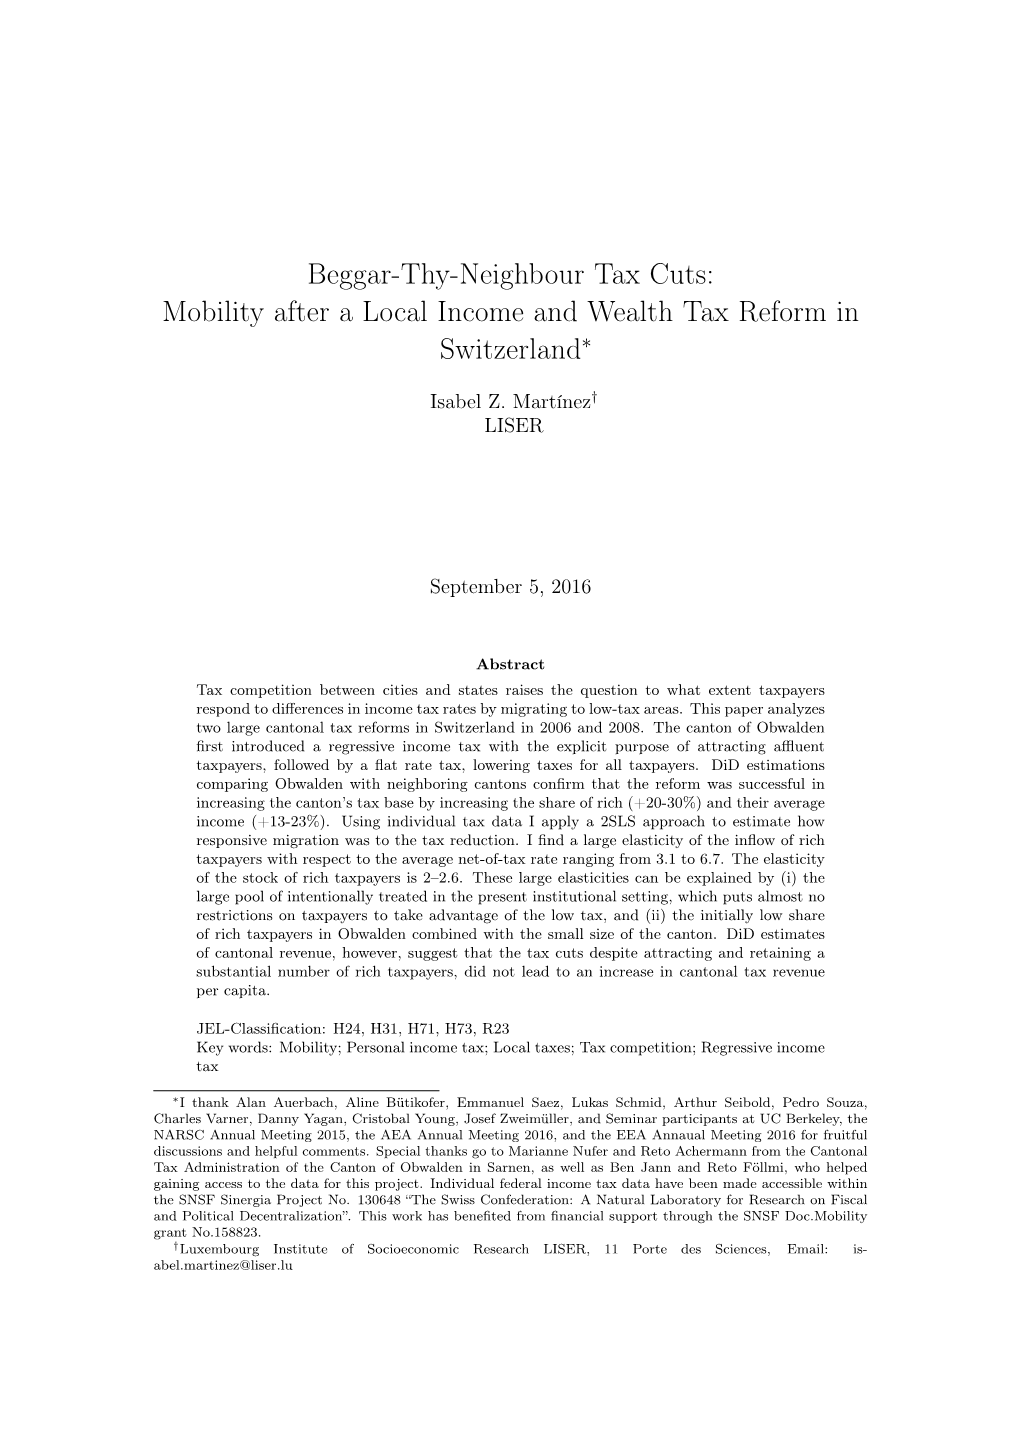 Mobility After a Local Income and Wealth Tax Reform in Switzerland∗